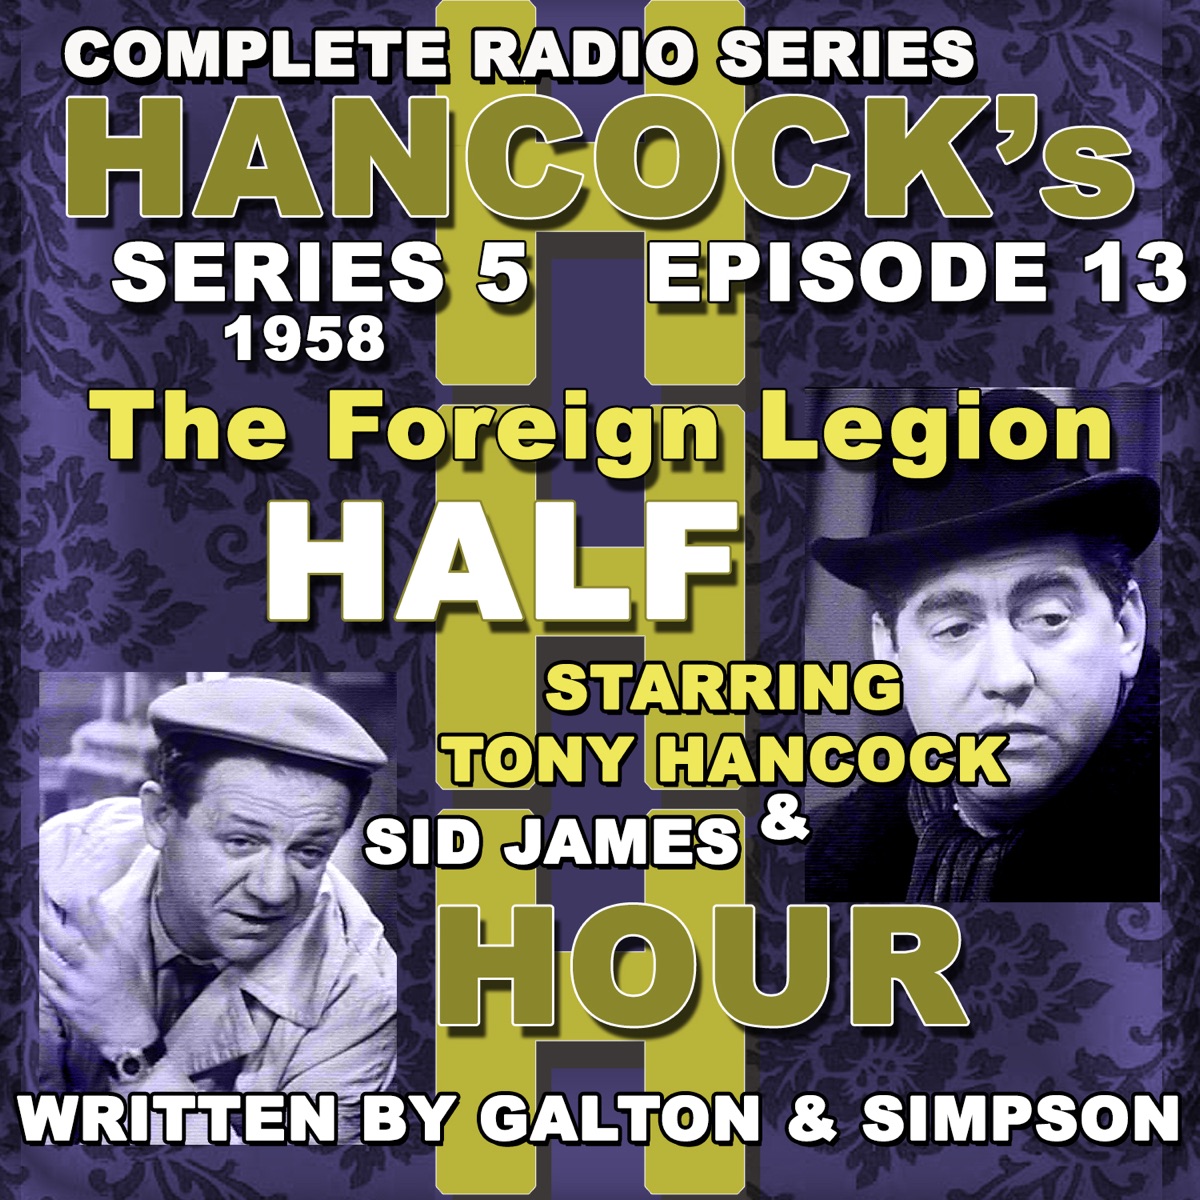 Hancock's Half Hour Radio - Series 5, Episode 14: Sunday Afternoon at Home  (feat. Sid James) - EP by Tony Hancock on Apple Music